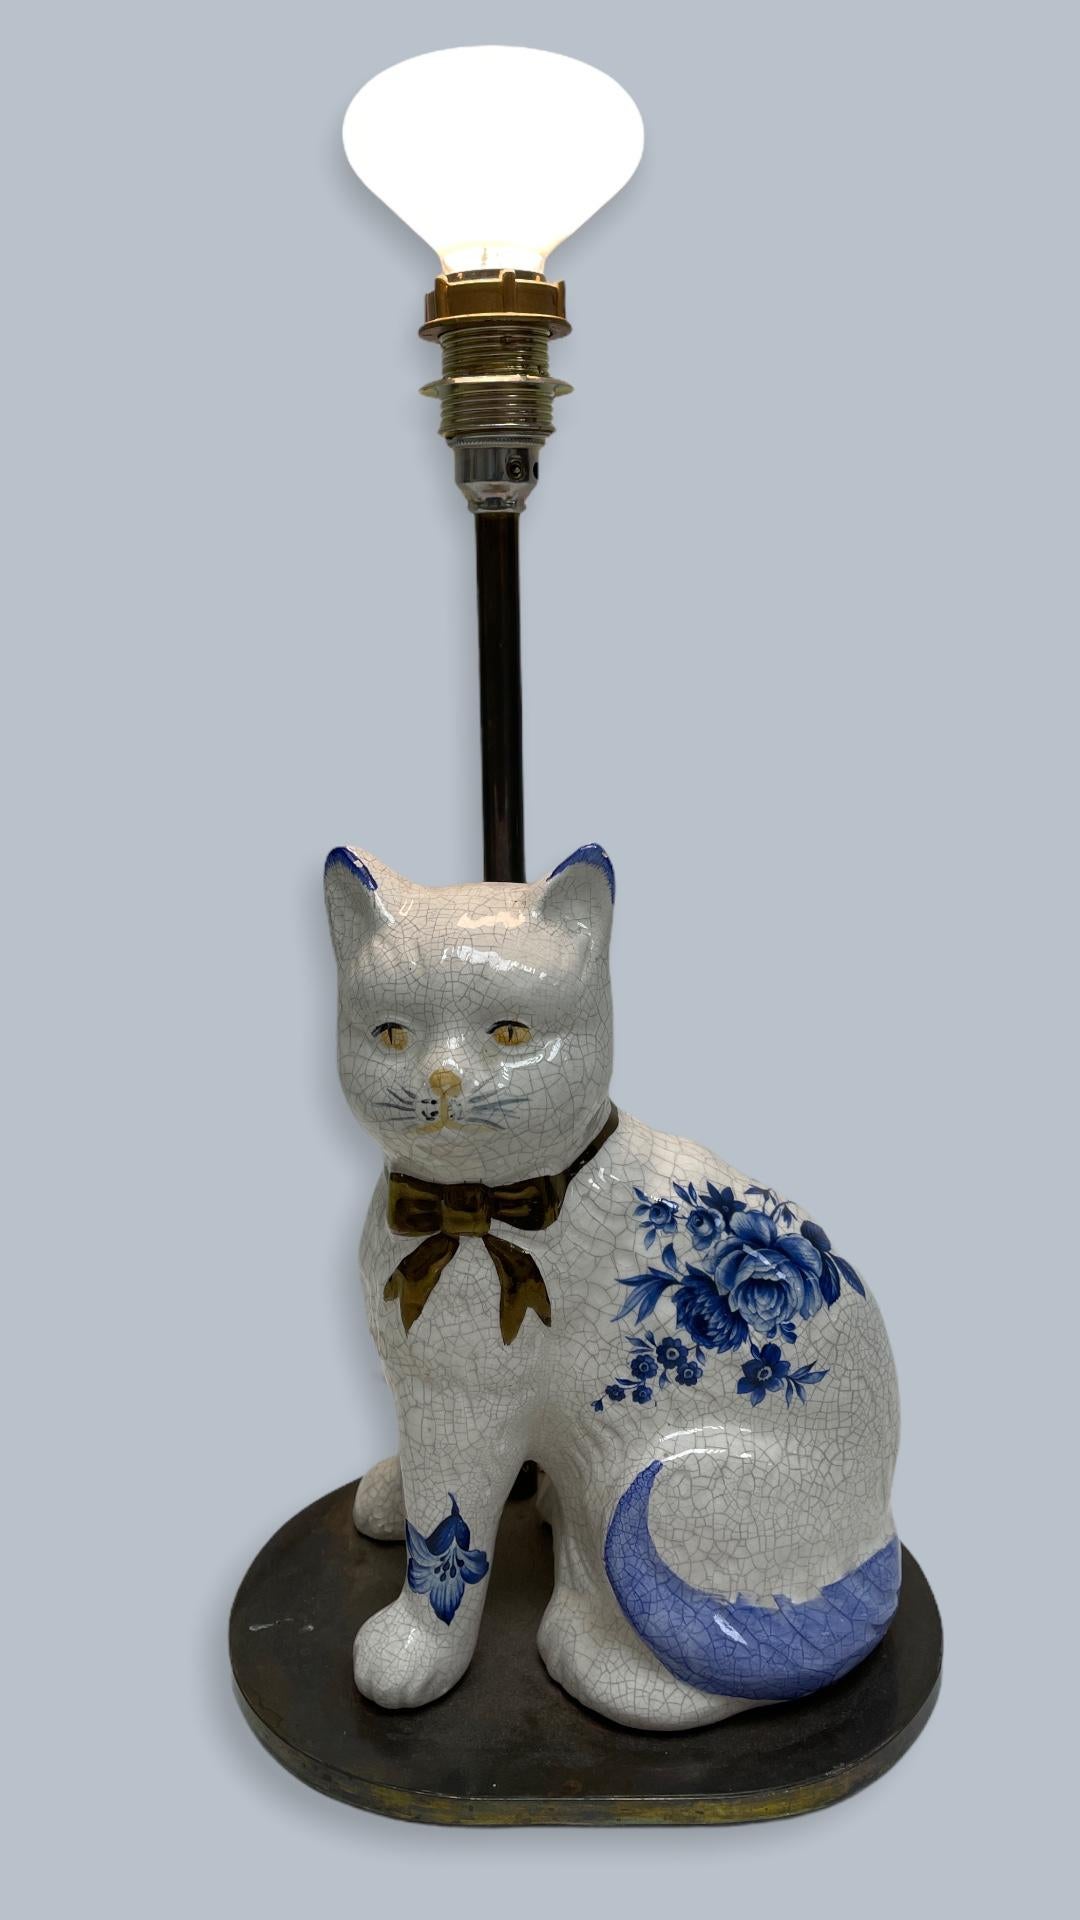 Beautiful 1960s German Cat statue figurine table lamp. Nice addition to your room or entry hall. Cat made of ceramic, hand painted. Cat Figure is approx. 7 3/4